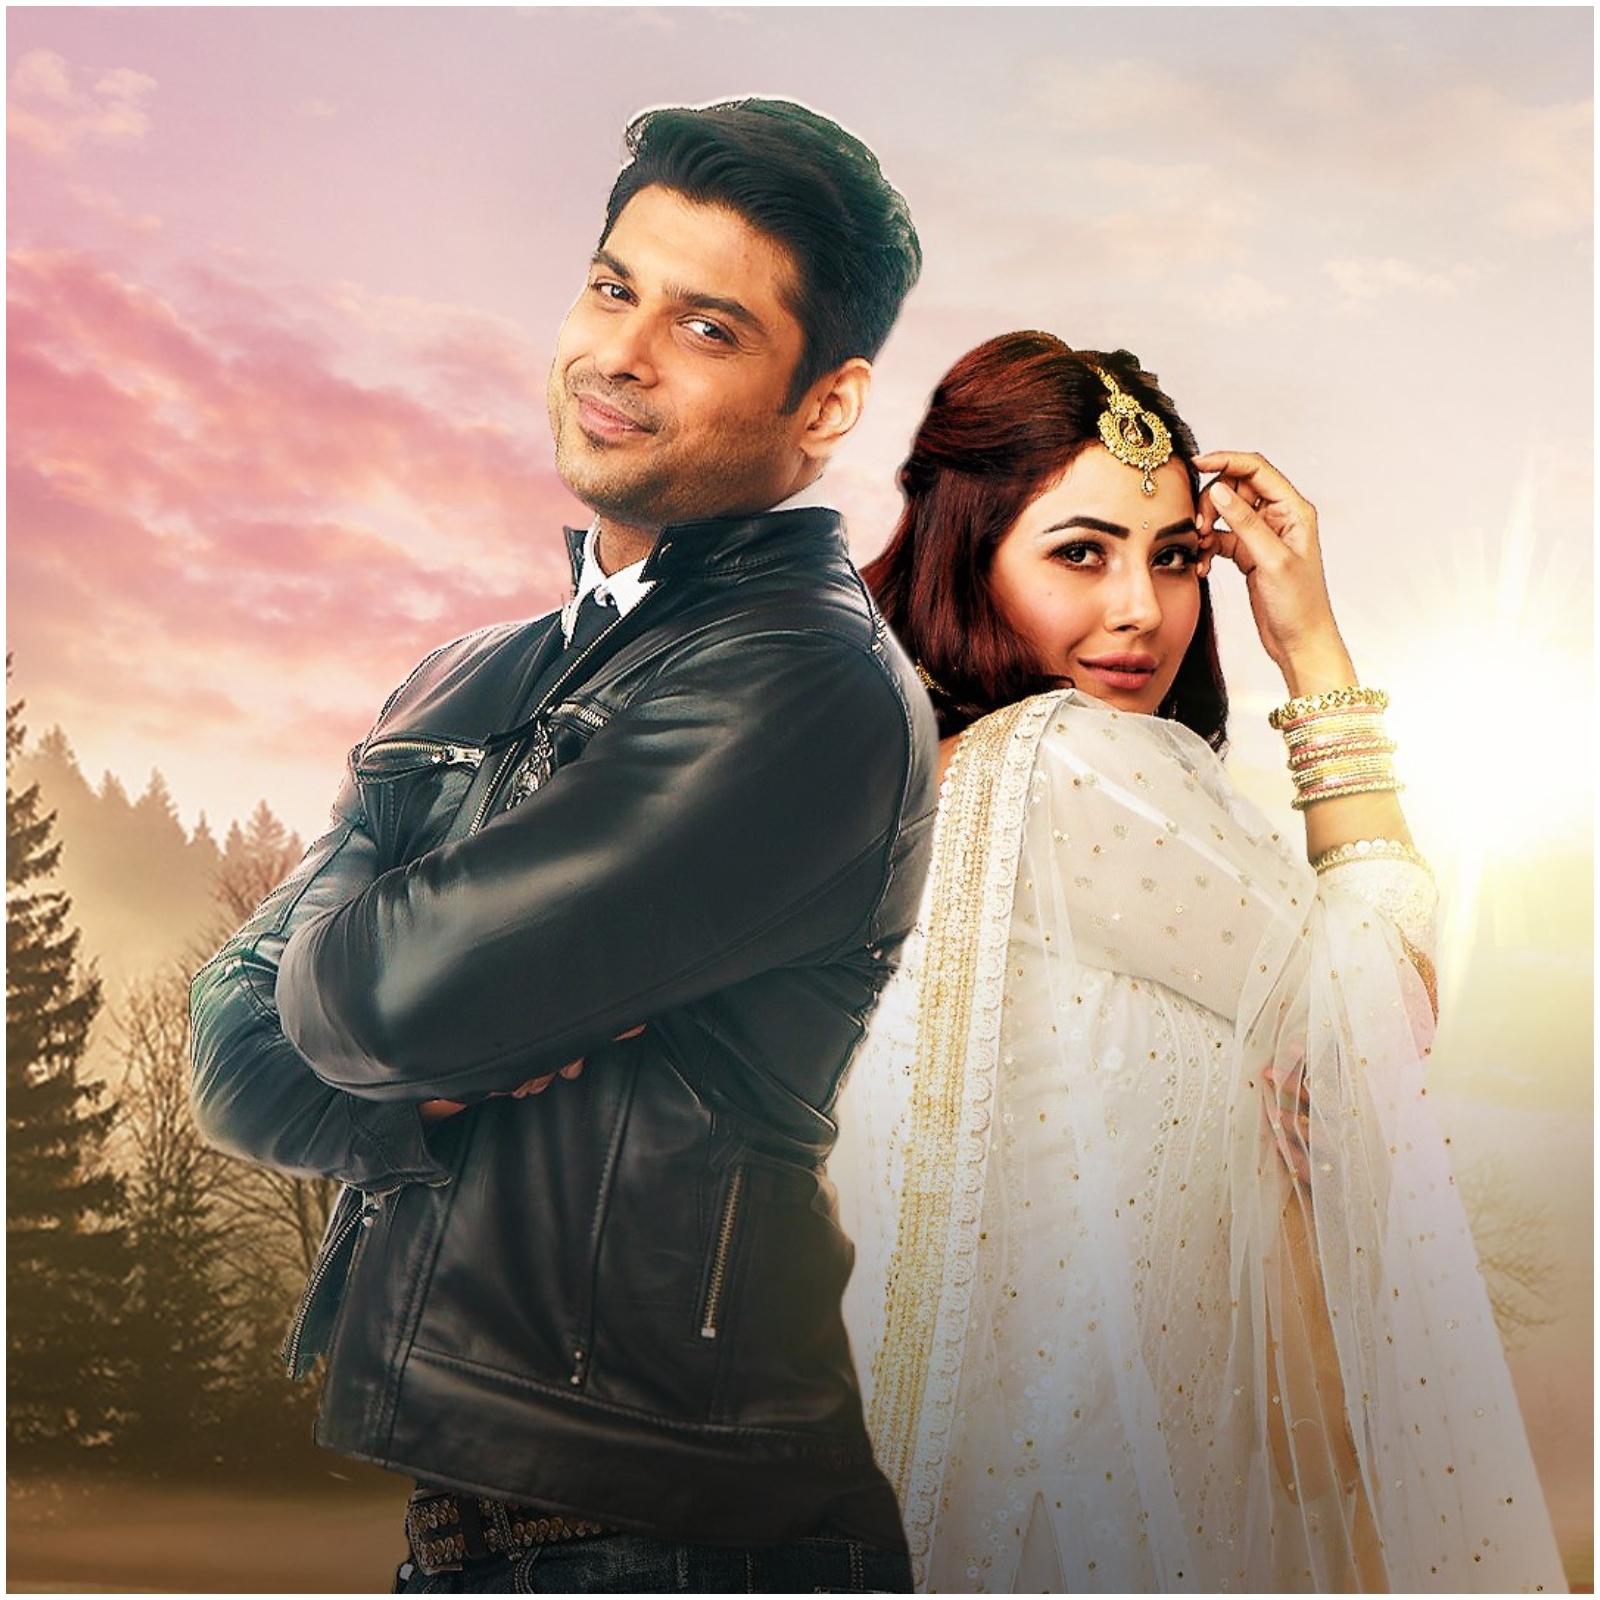 Sidharth Shukla may be no more. But #sidnaaz will live on forever. 